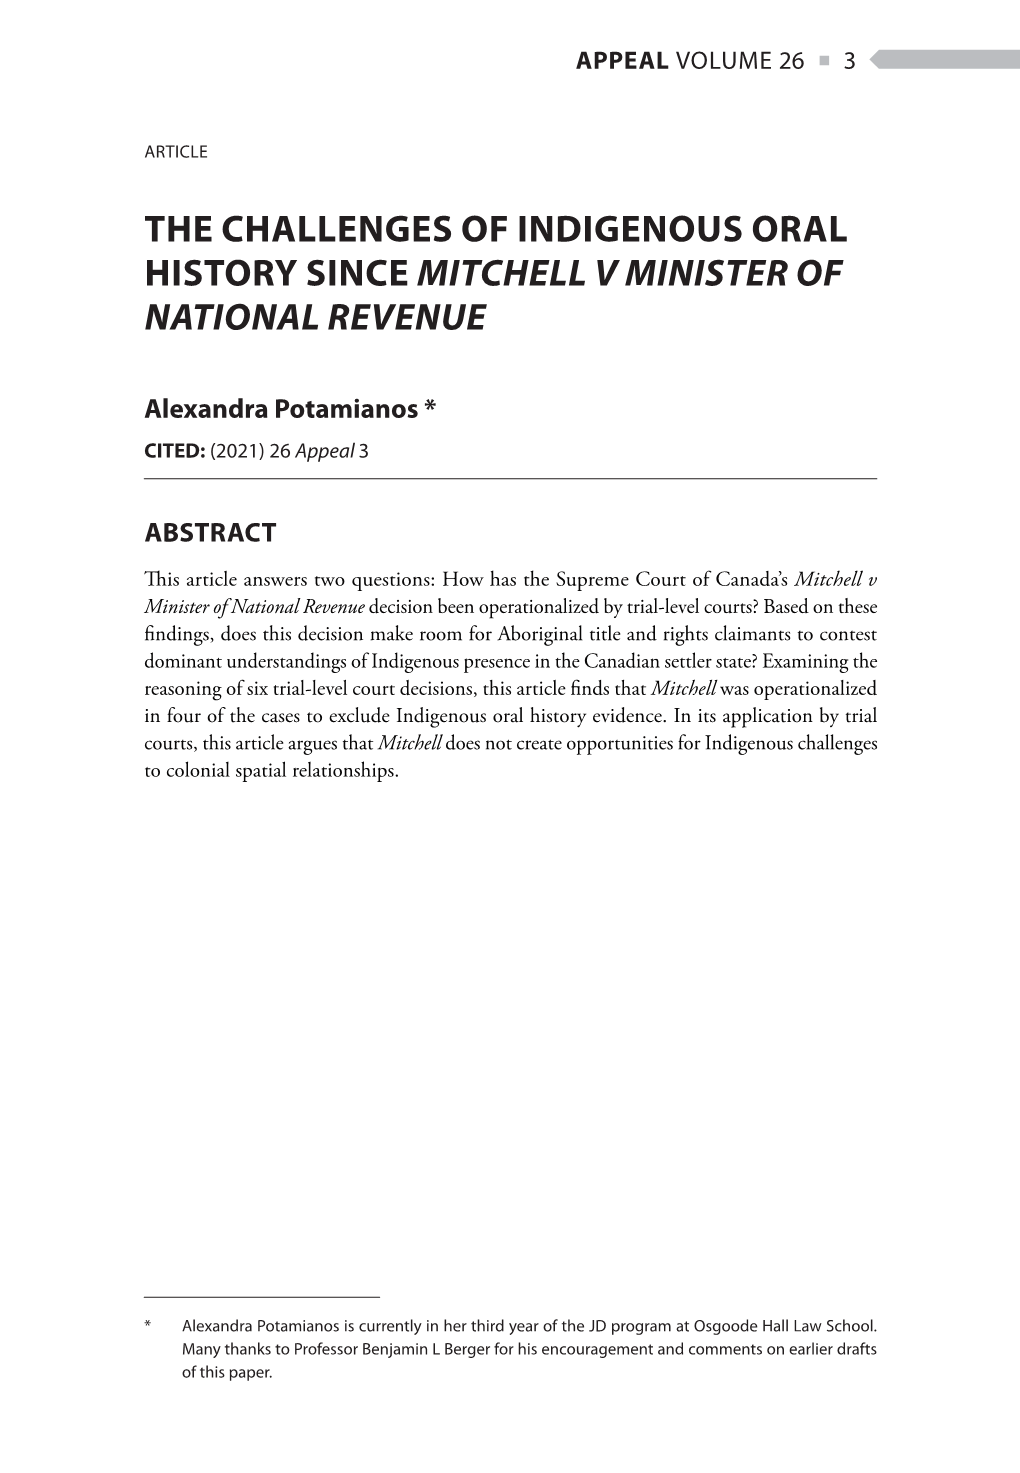 The Challenges of Indigenous Oral History Since Mitchell V Minister of National Revenue